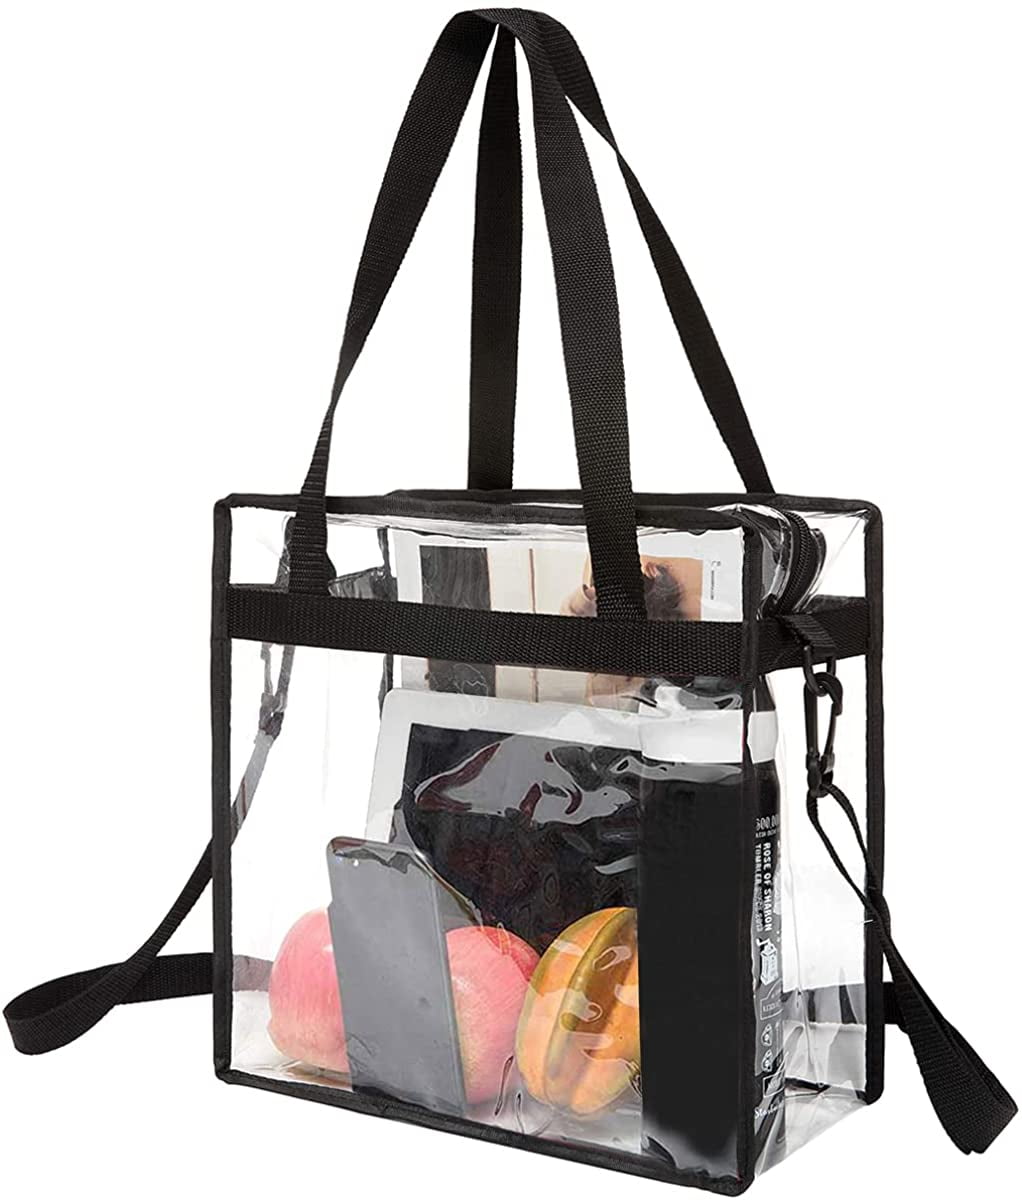 Stadium Approved Clear Tote Bag with Zipper Closure - PVC, Nylon ...